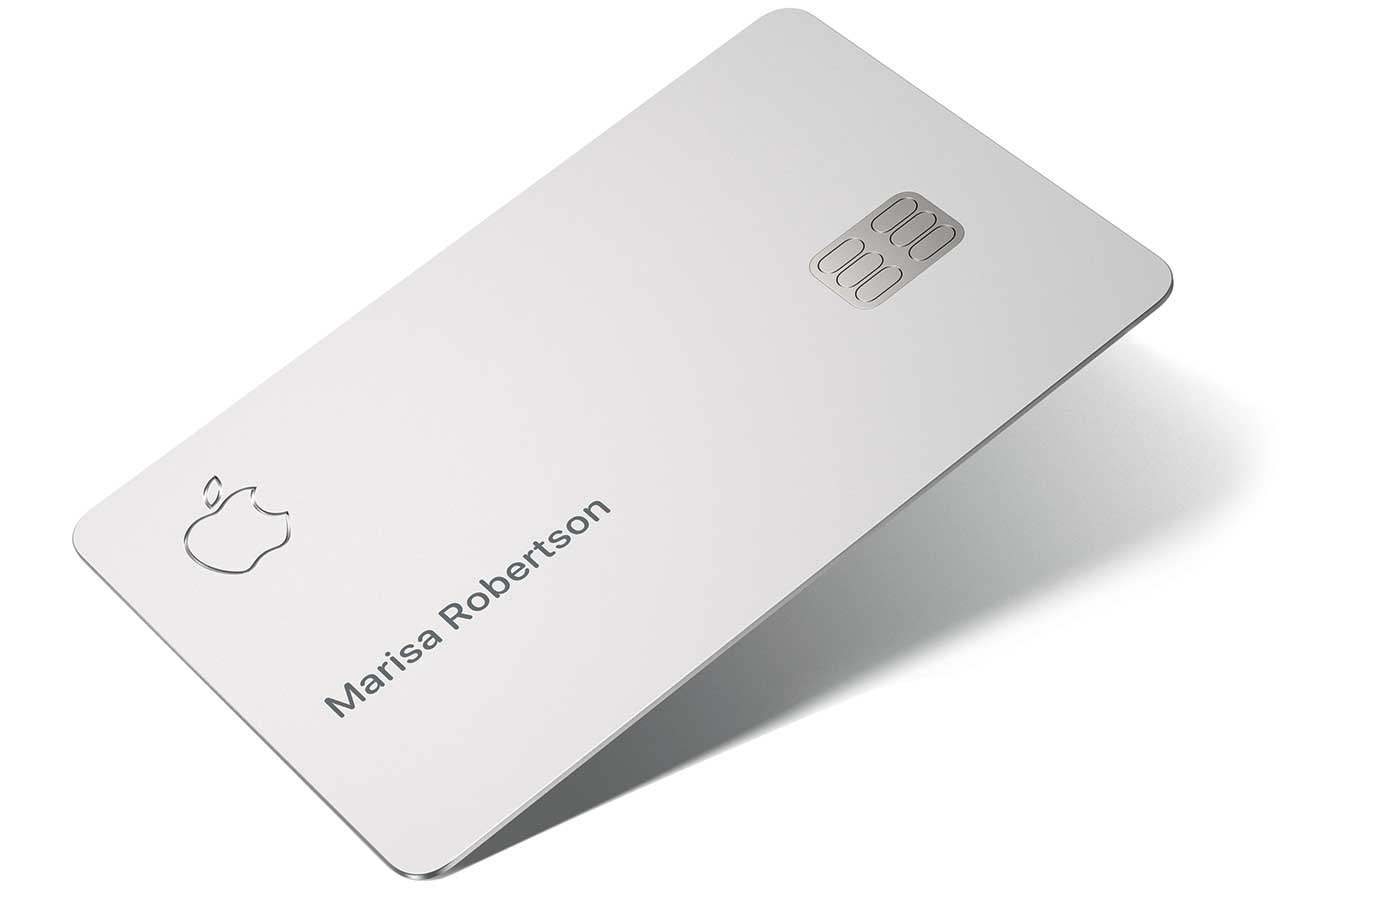 Apple Card Makes Surprise Move with 4.5% Interest Rate Boost for Savings